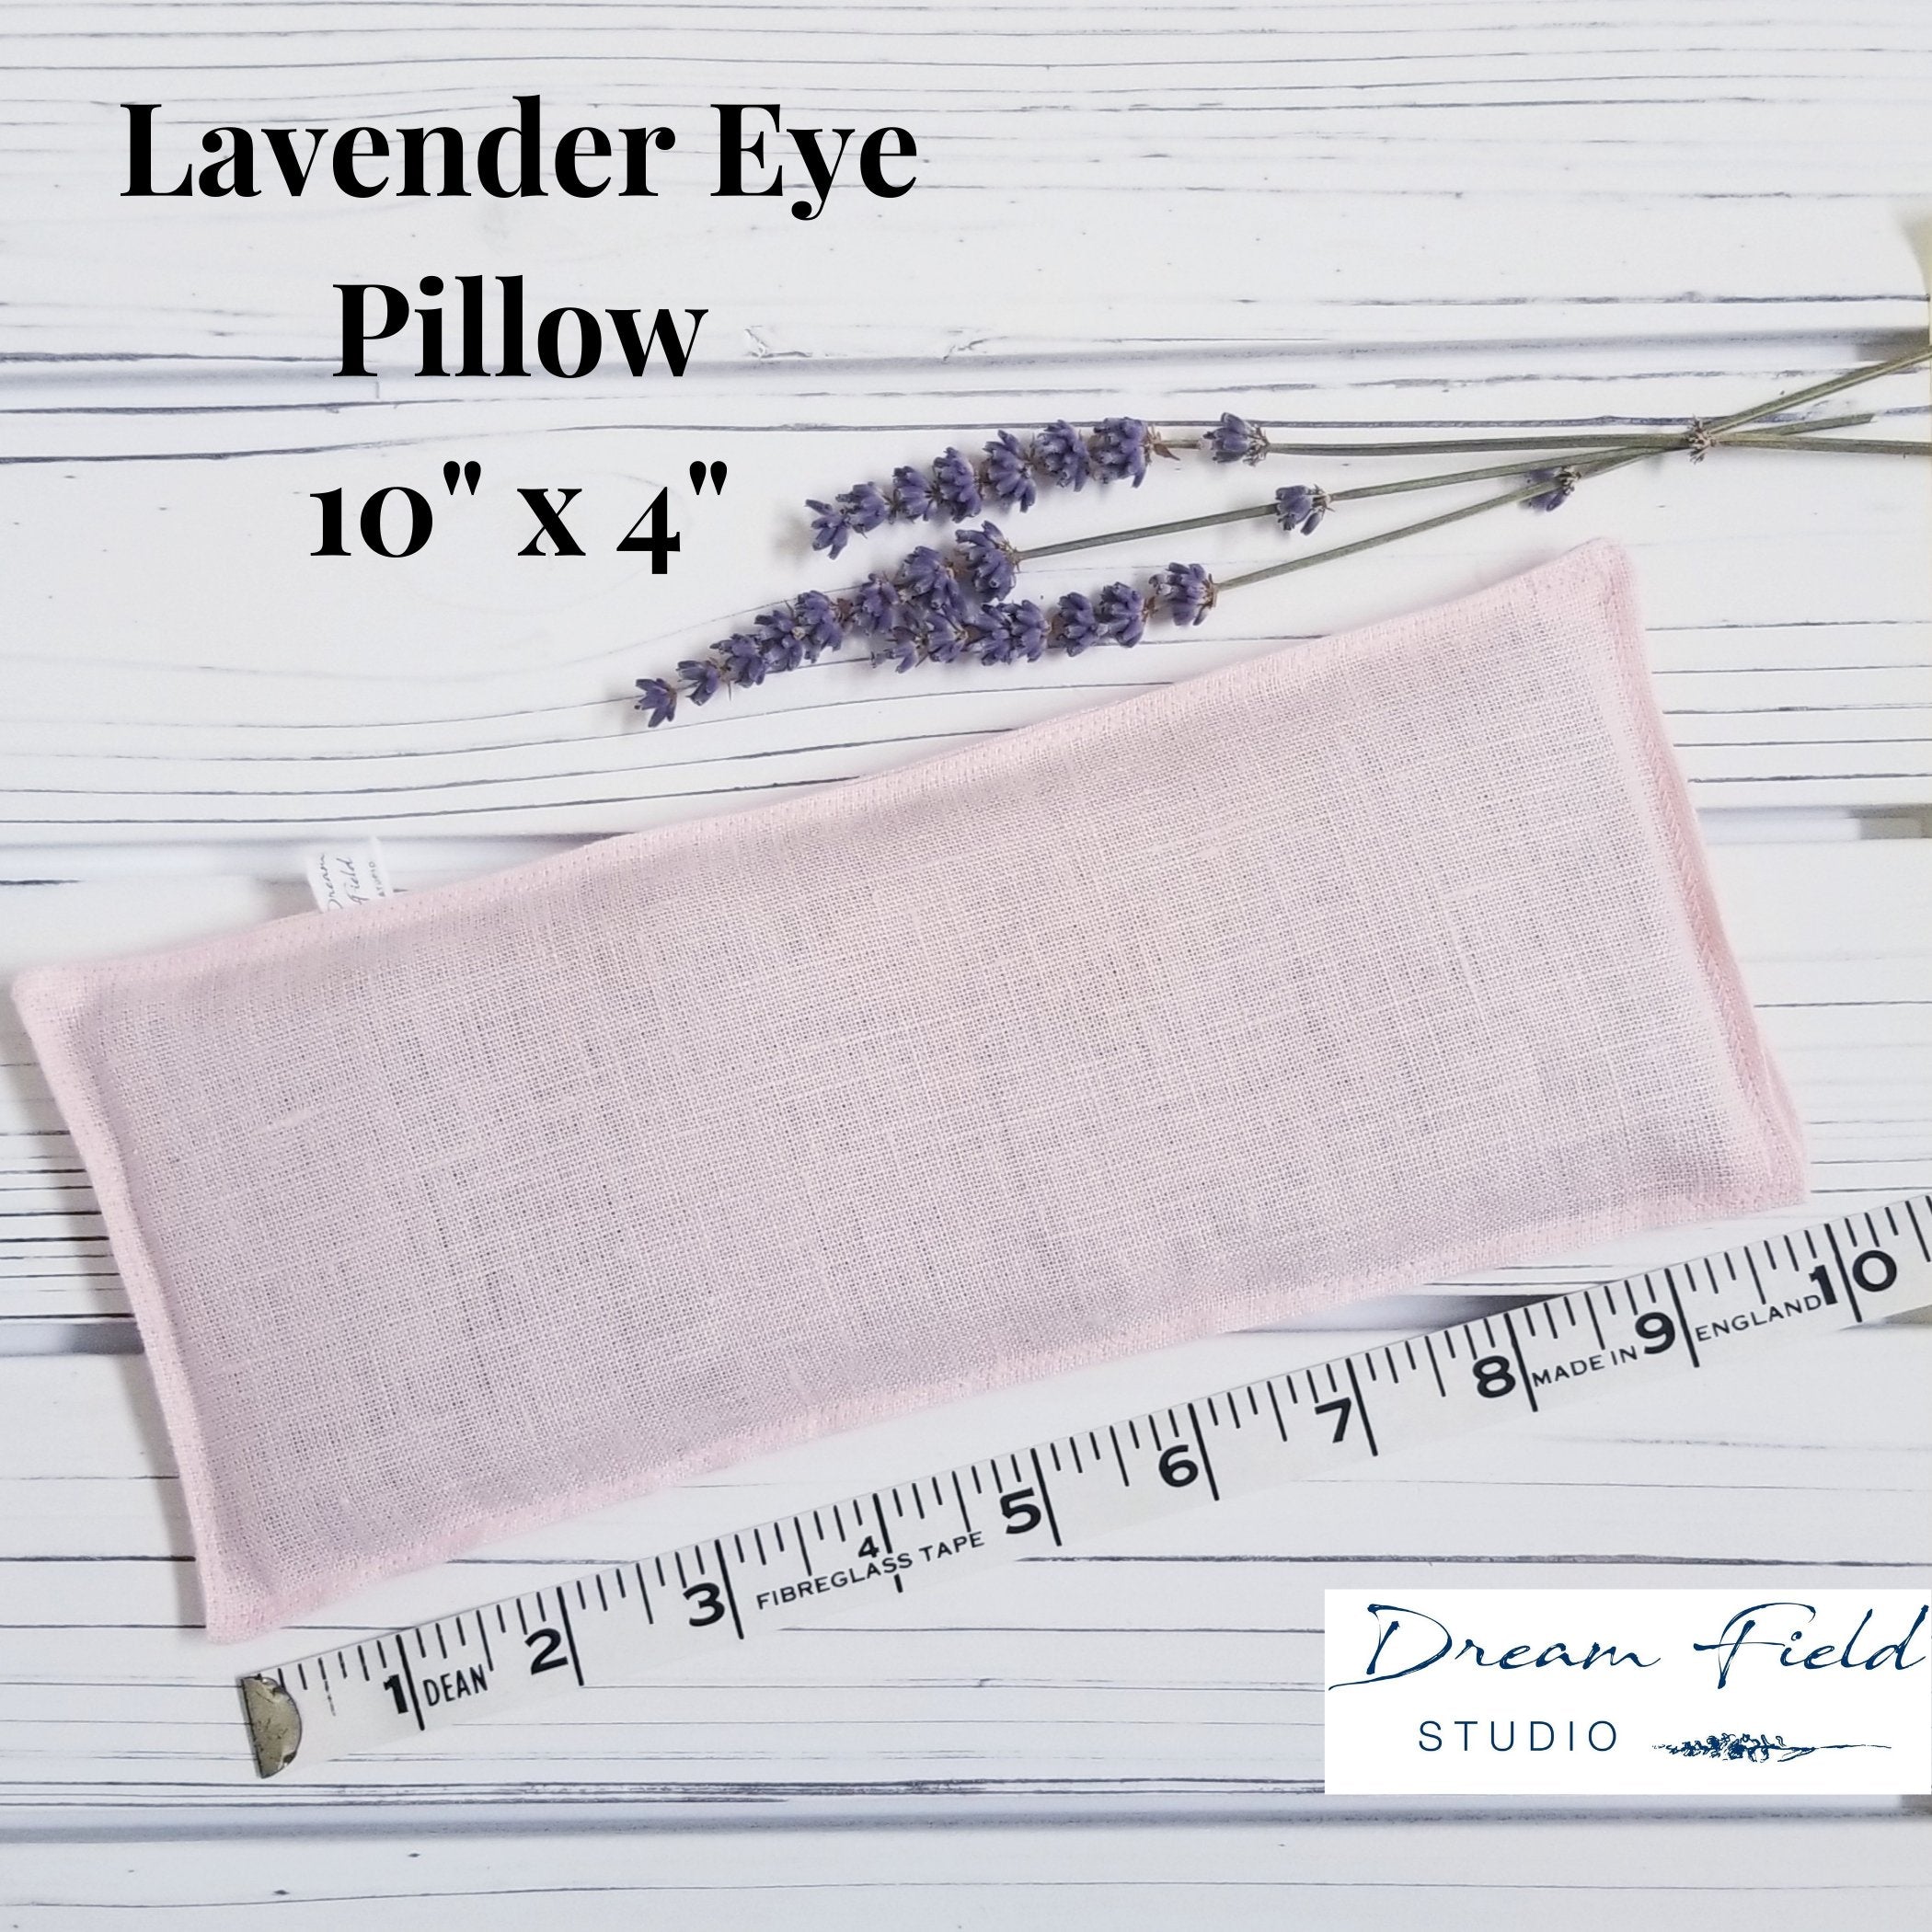 infographic showing eye pillow size for Dream Field Studio